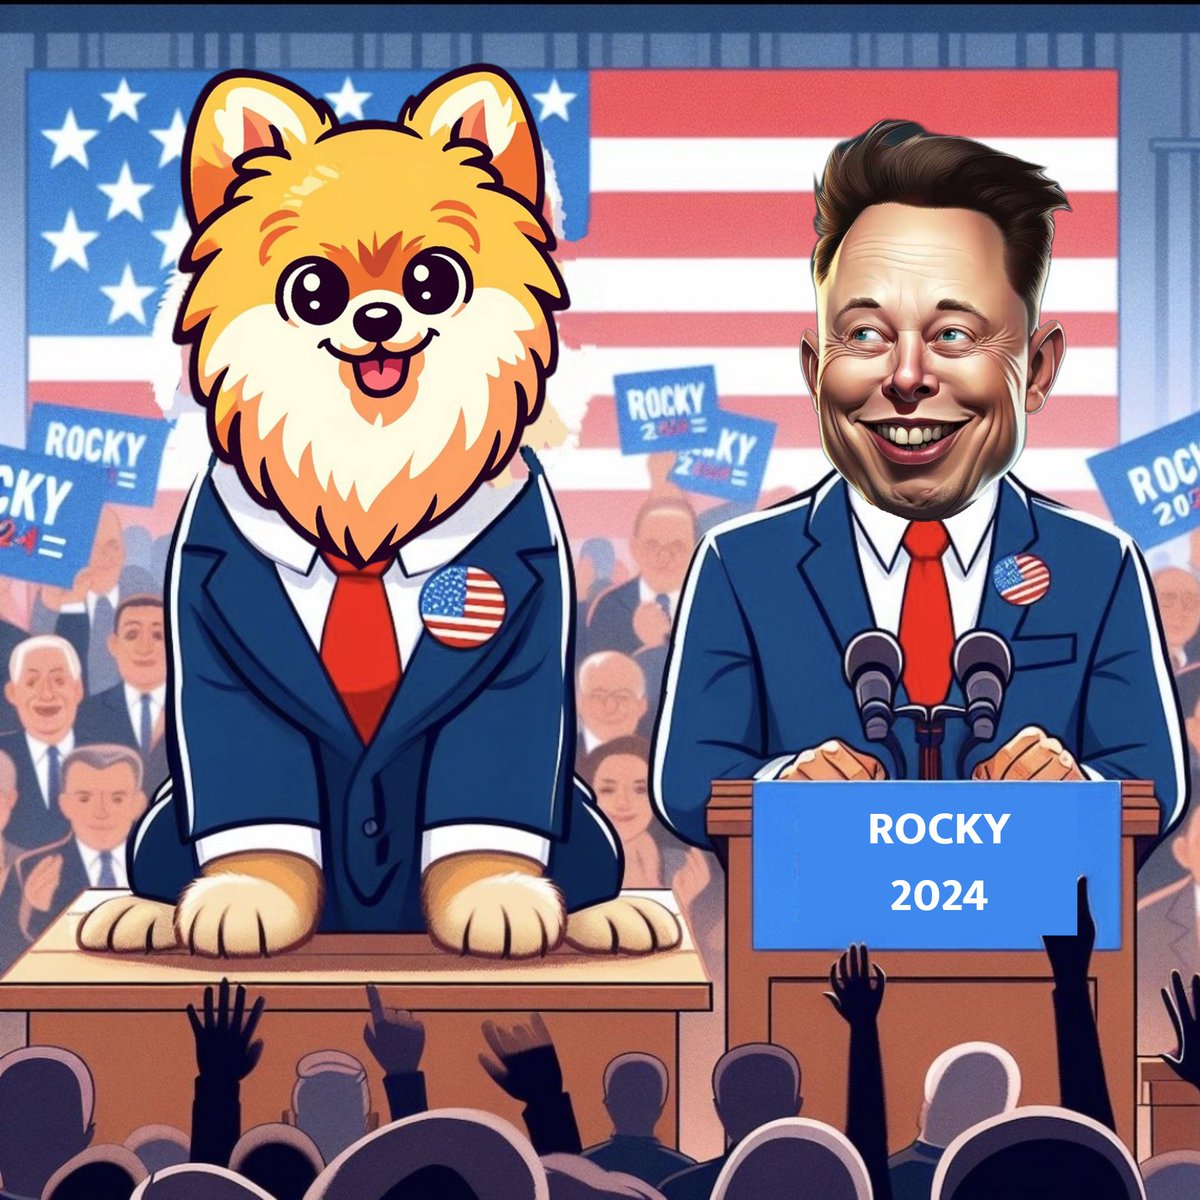 BREAKING: .@elonmusk is endorsing $ROCKY in his 2024 presidential camping.

.@RockyCoinBase #ROCKYMEMES